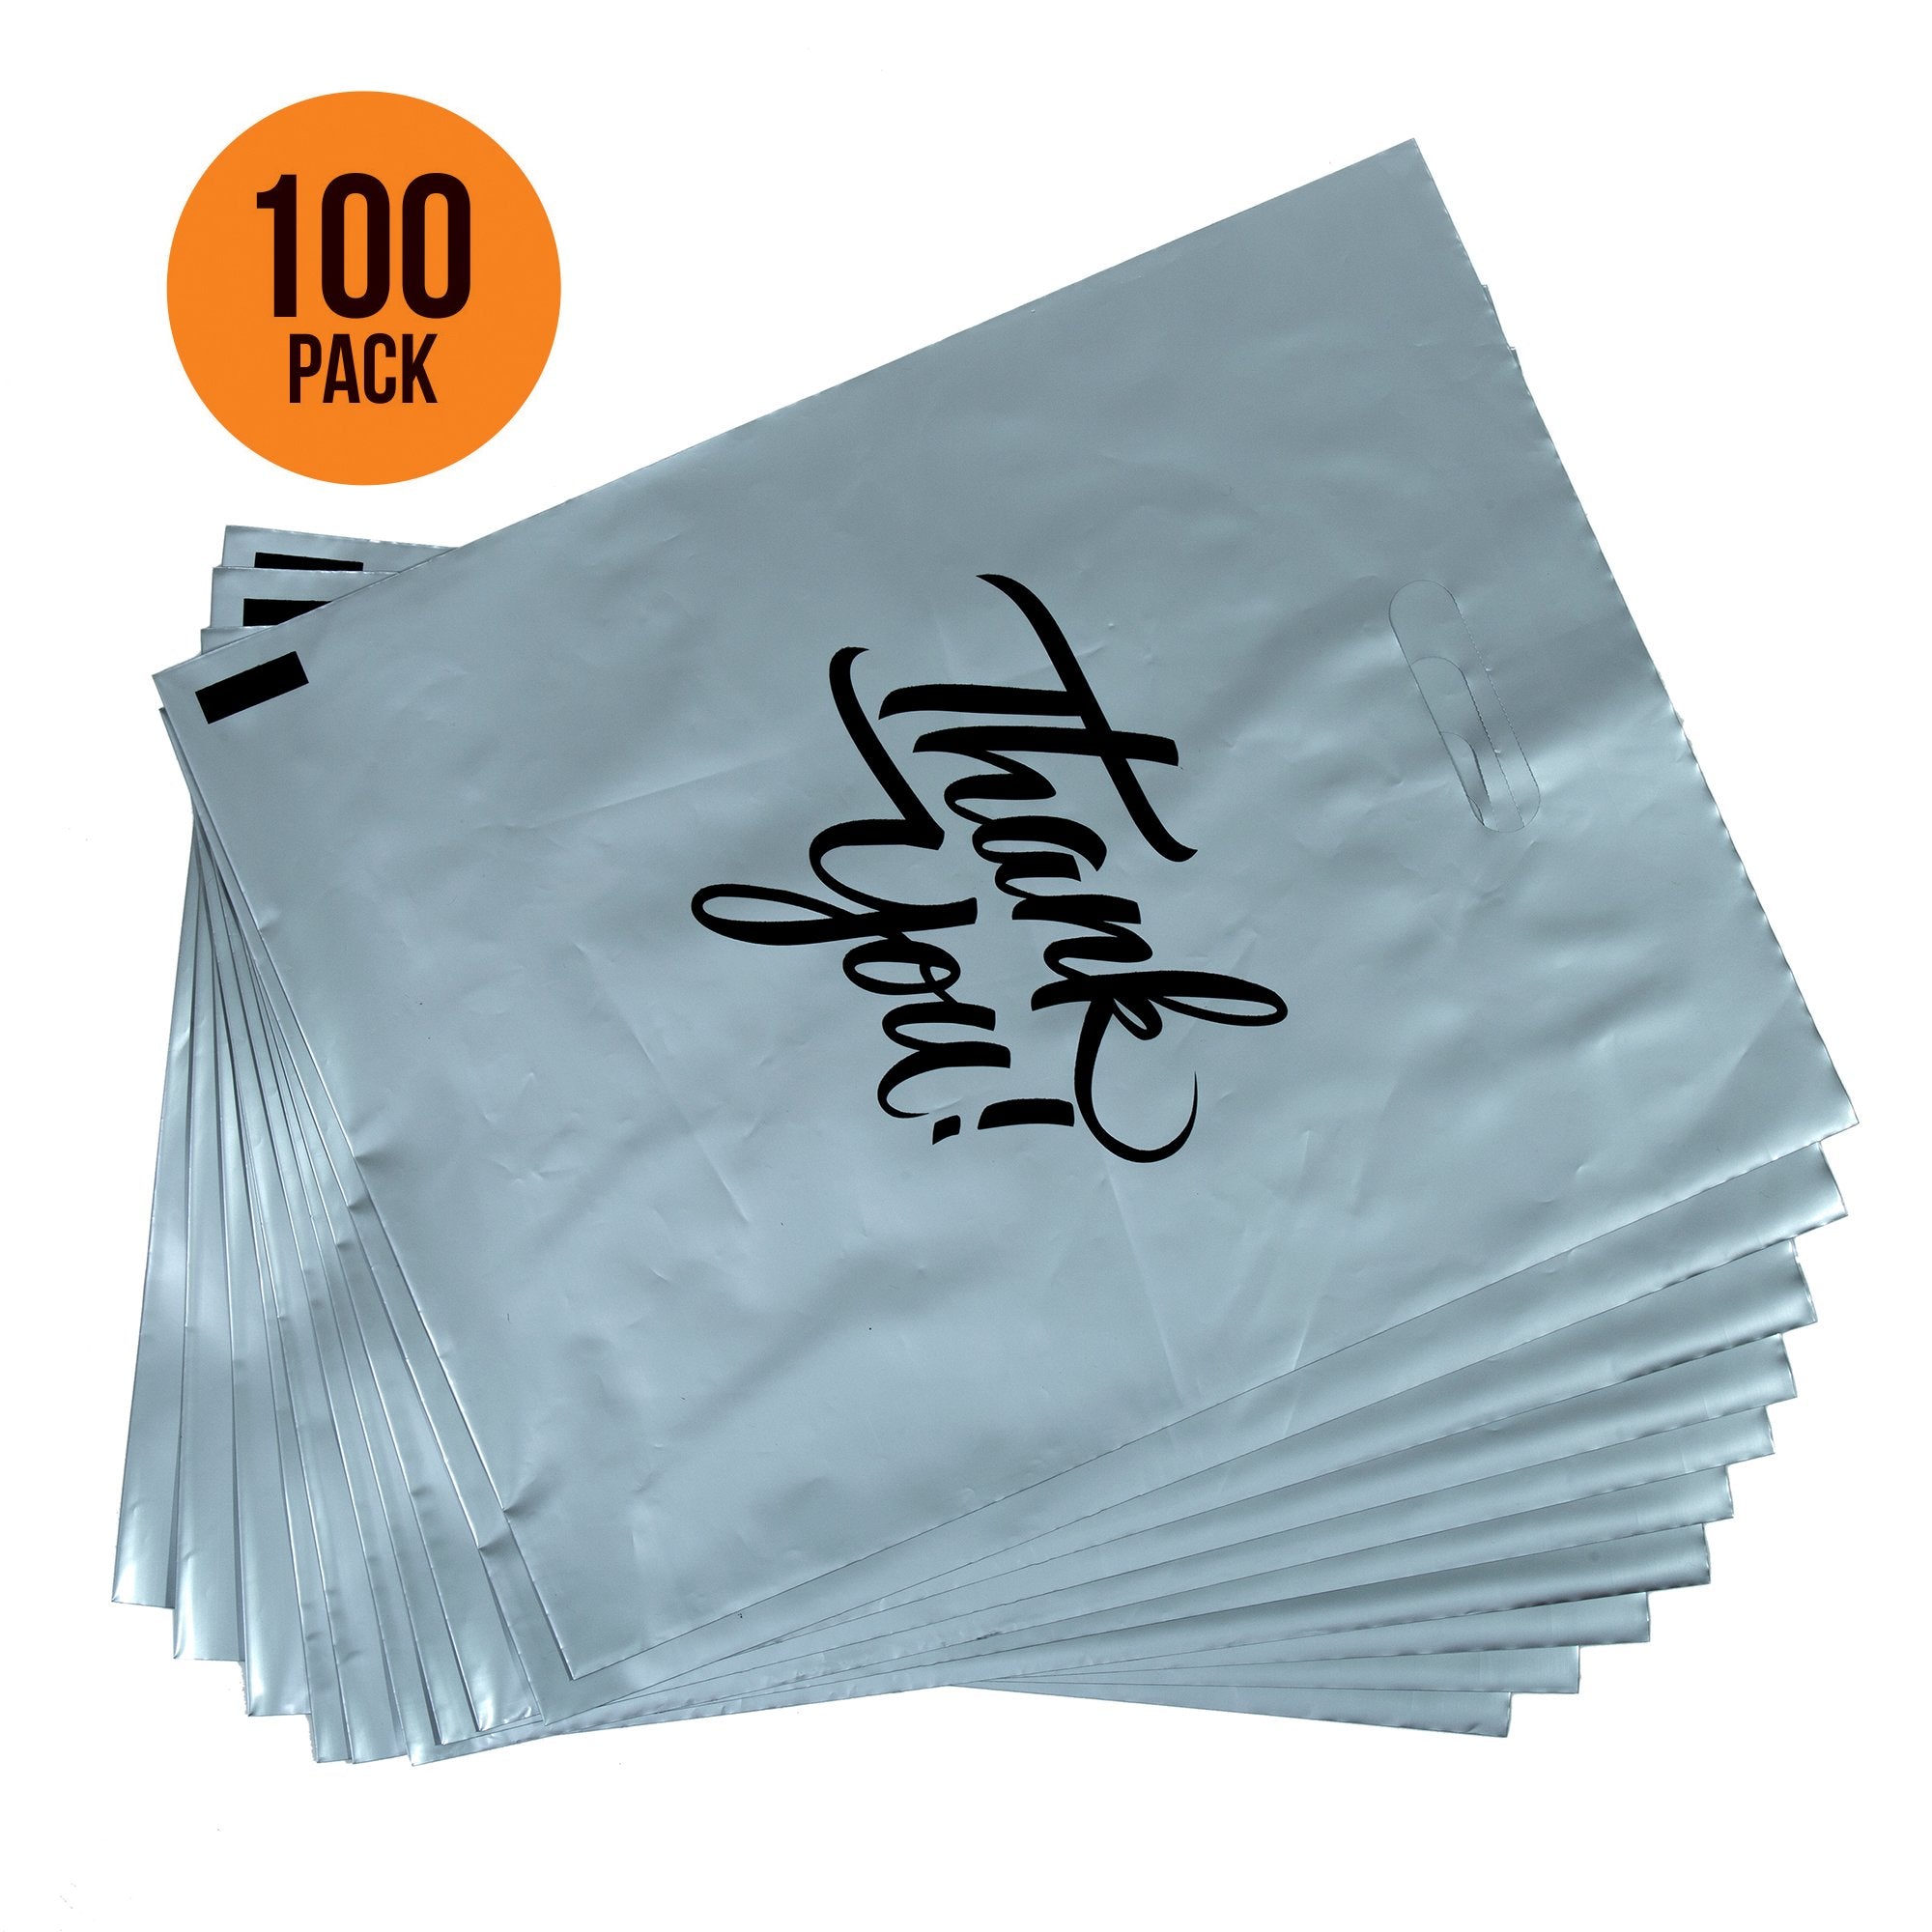 16 x 18 white thank you bags pack of 100